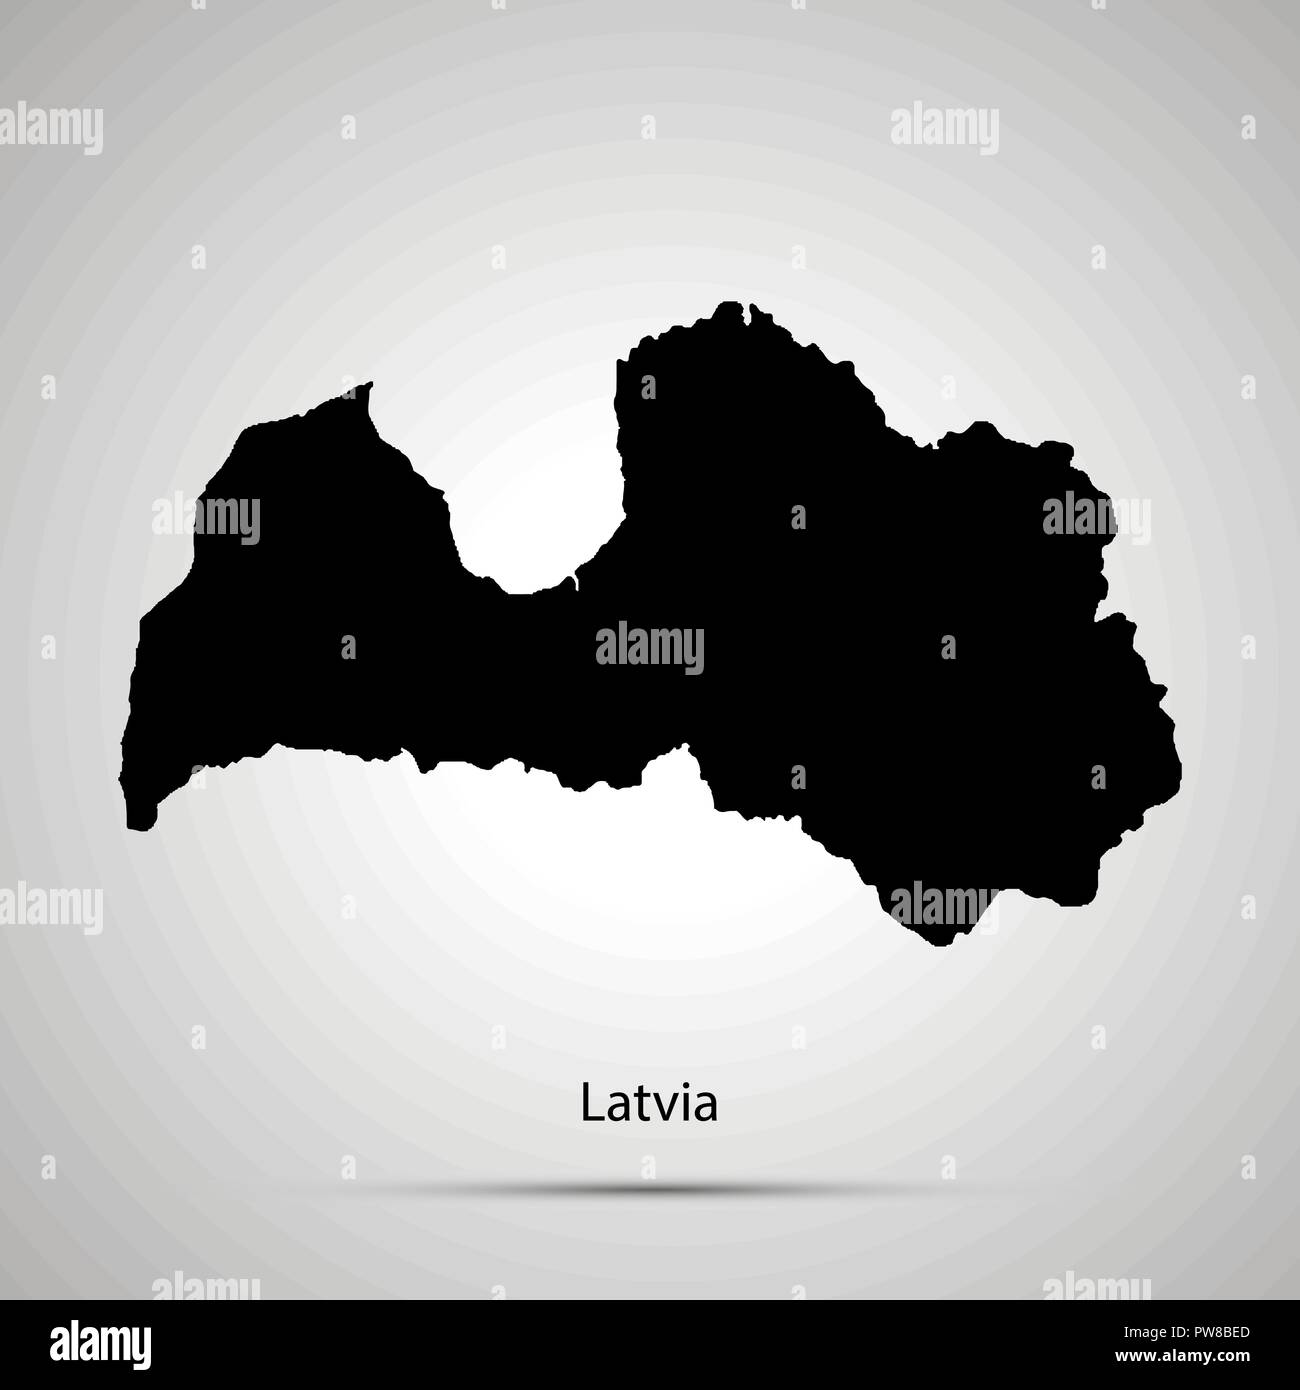 Latvia country map, simple black silhouette on gray Stock Vector